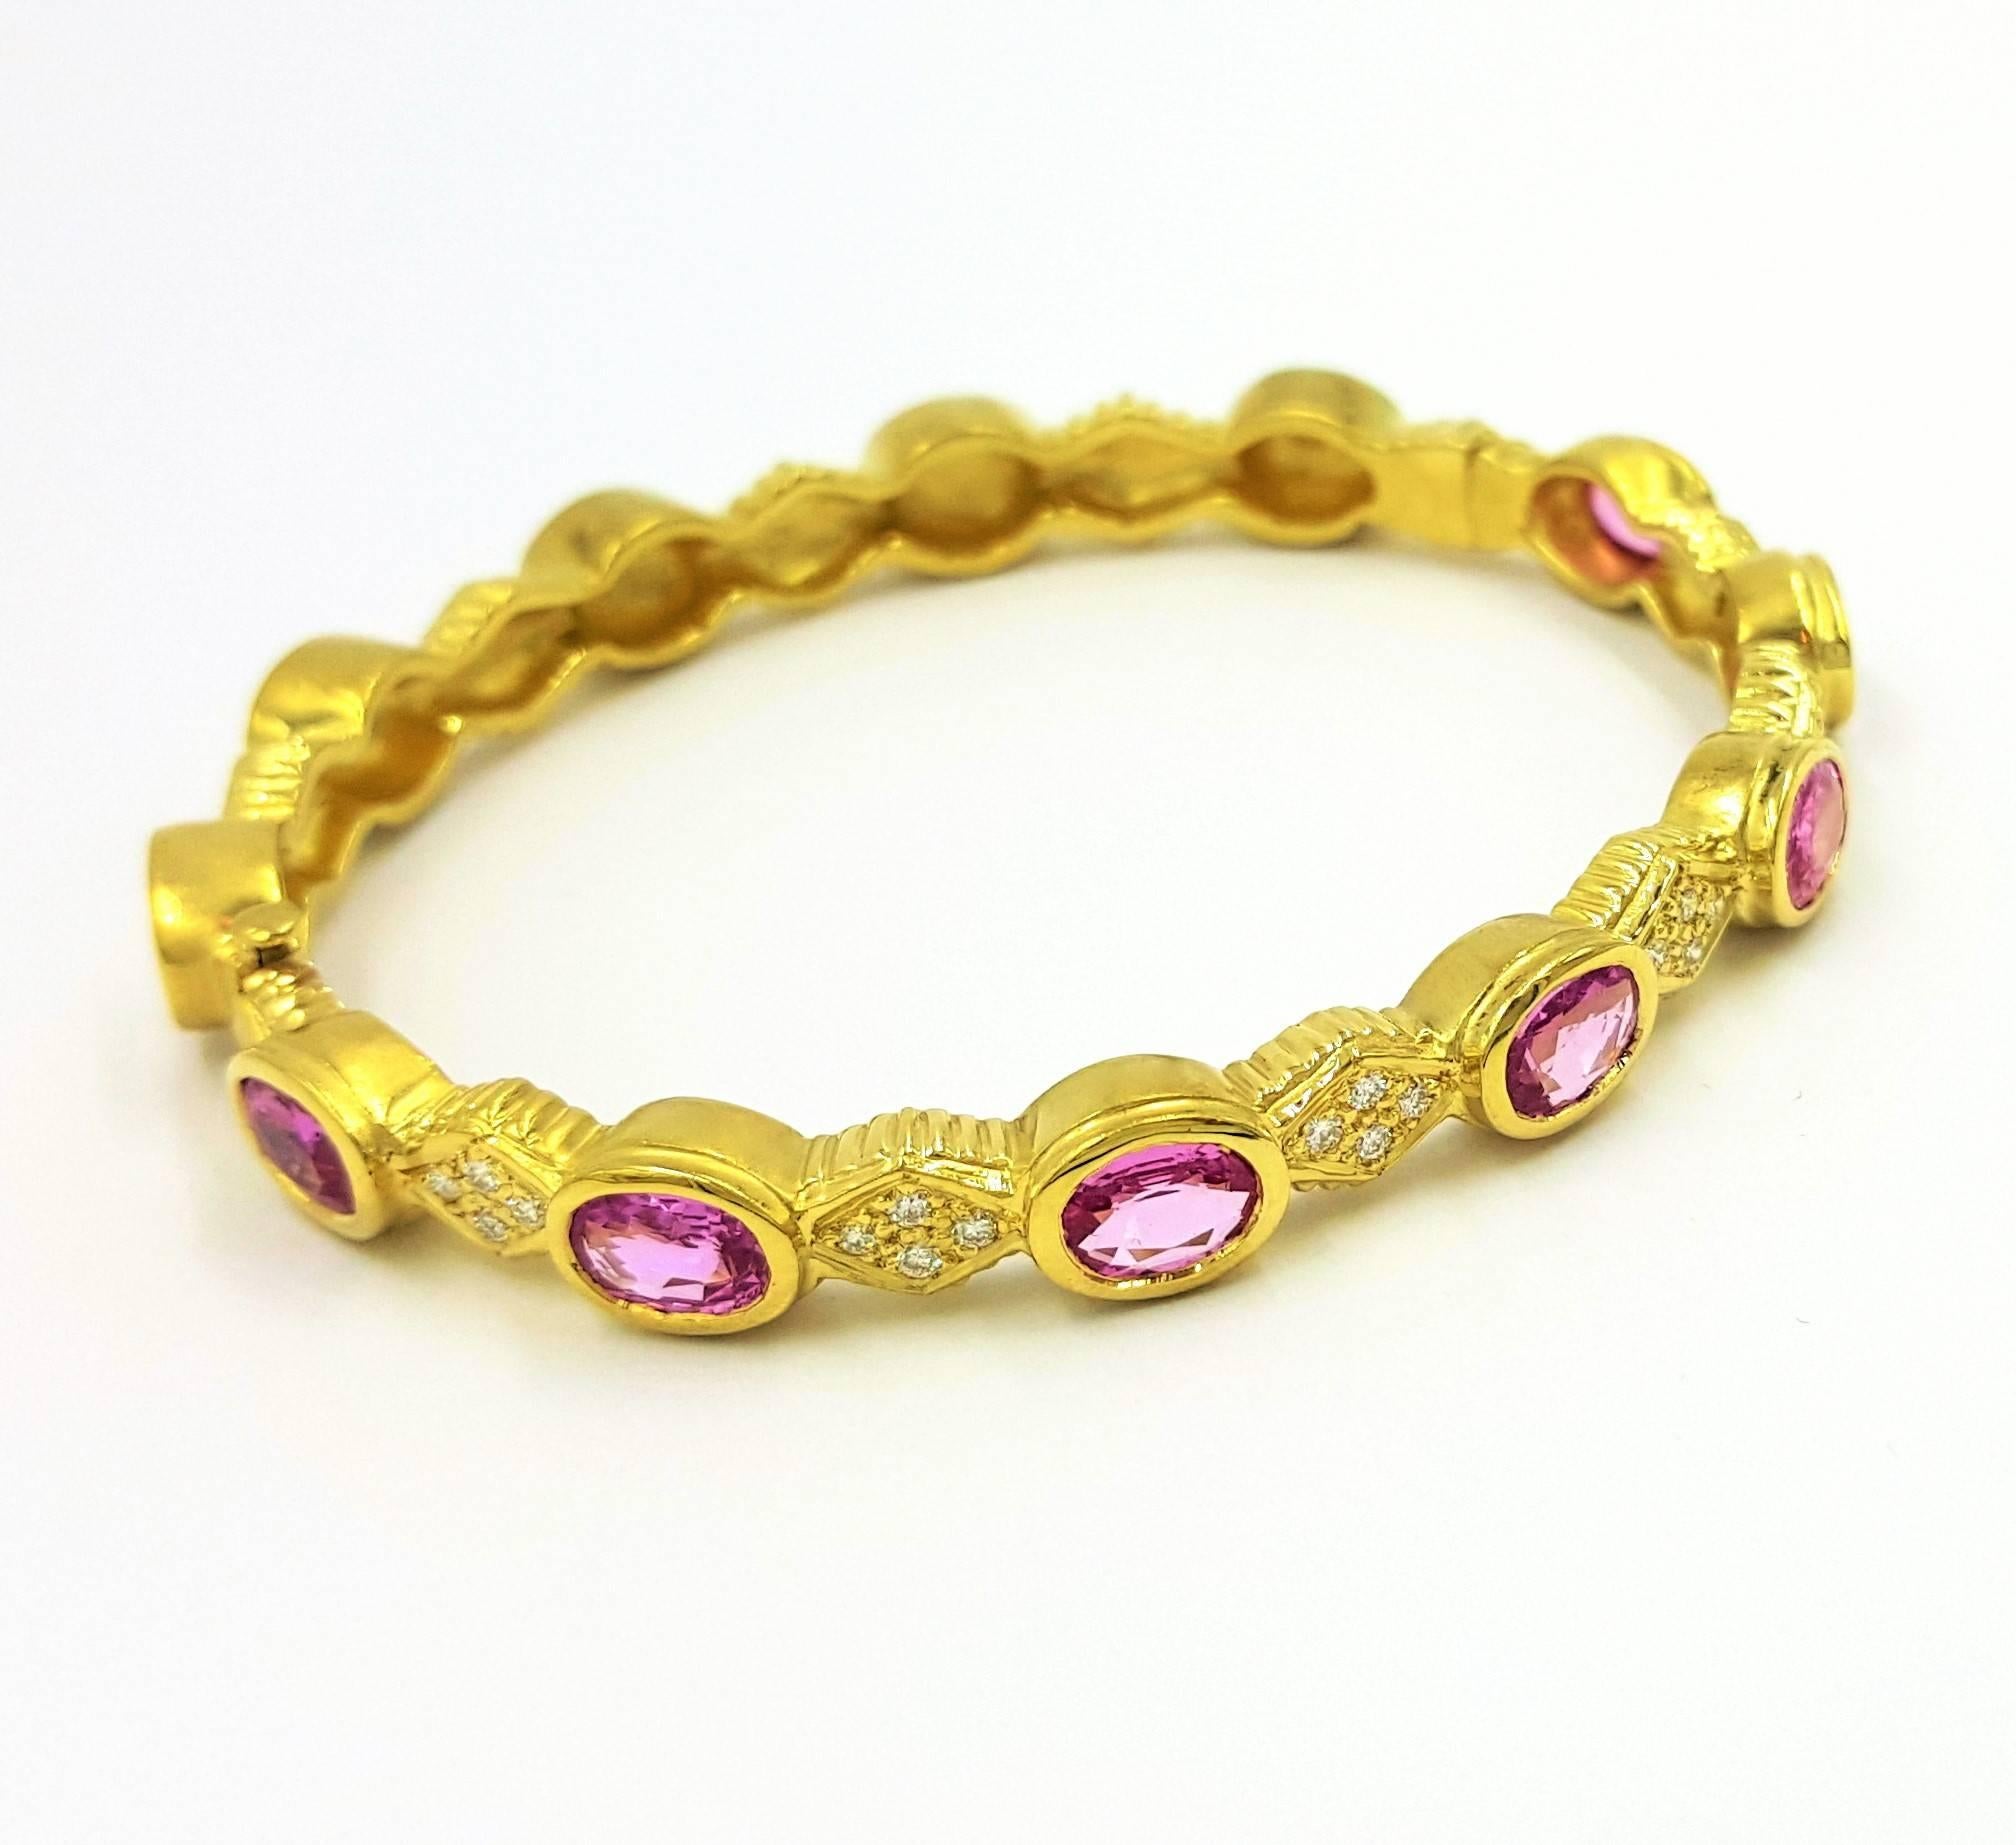 This Doris Panos Signed Hinged Bangle Bracelet Features 7 Carats Of Natural Deep Purplish Pink Sapphires and .25 Carat of VS Clarity, G White Color, Round Brilliant Diamonds Set in 35 grams of 18KT Solid Gold And is Absolutely Fabulous! A truly